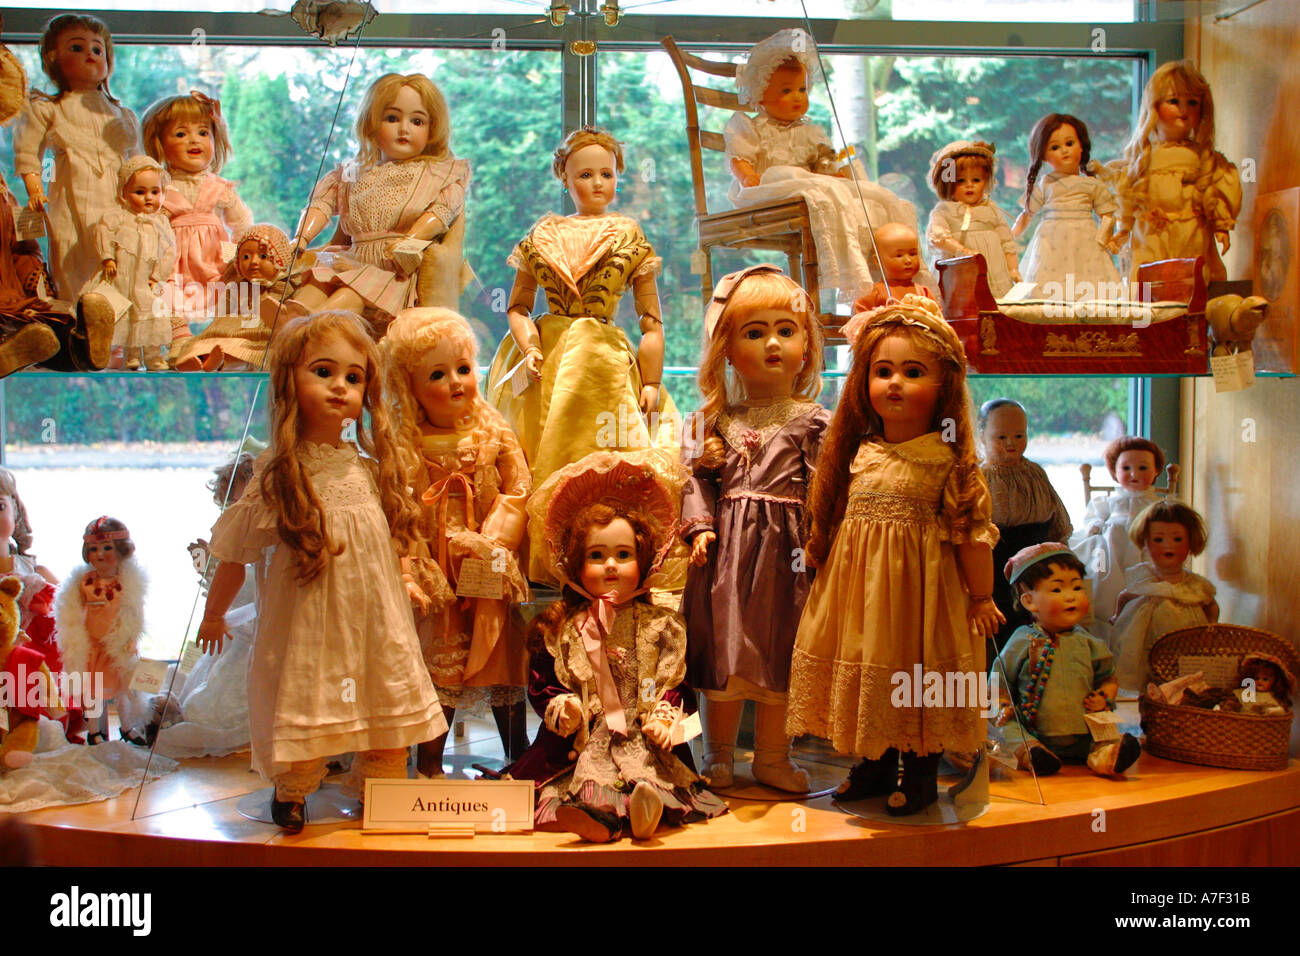 doll antique stores